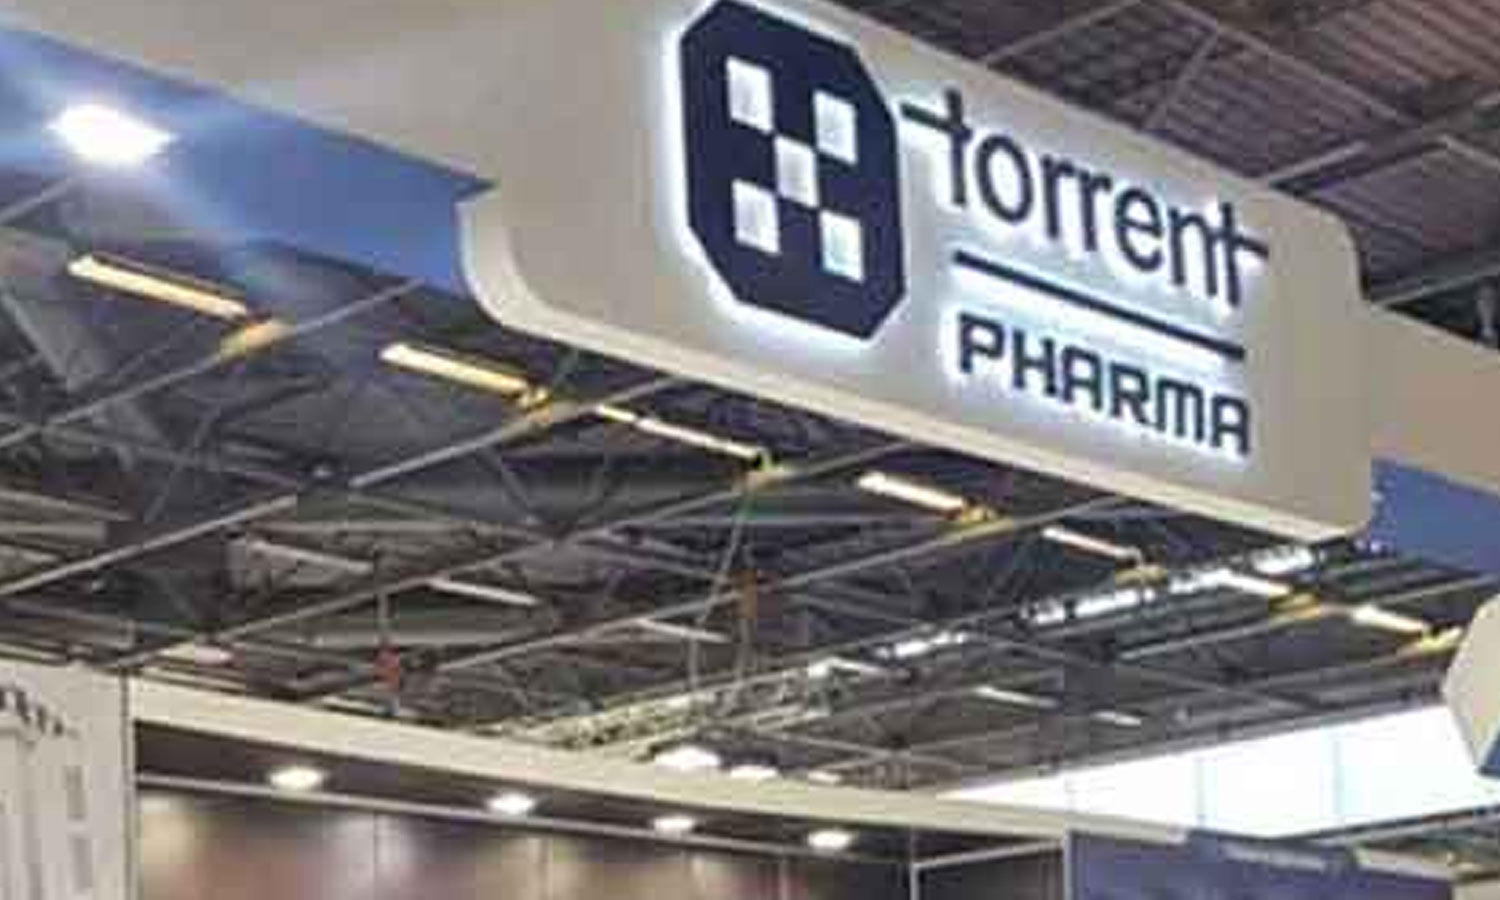 Torrent Pharma gets shareholder nod to raise up to Rs 5,000 crores